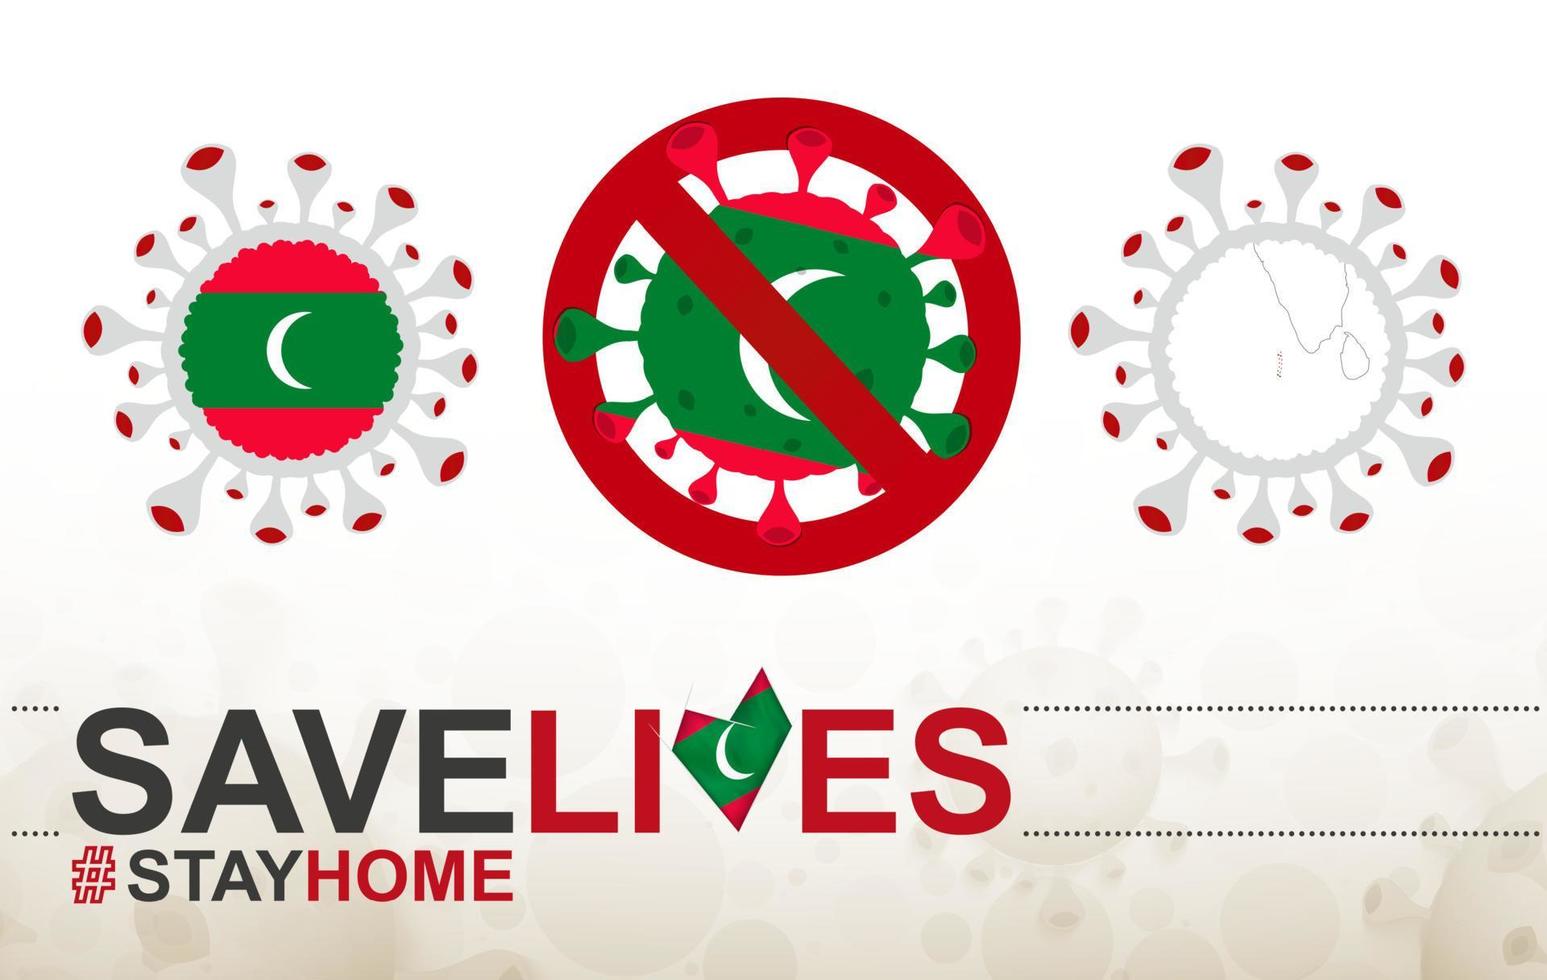 Coronavirus cell with Maldives flag and map. Stop COVID-19 sign, slogan save lives stay home with flag of Maldives vector